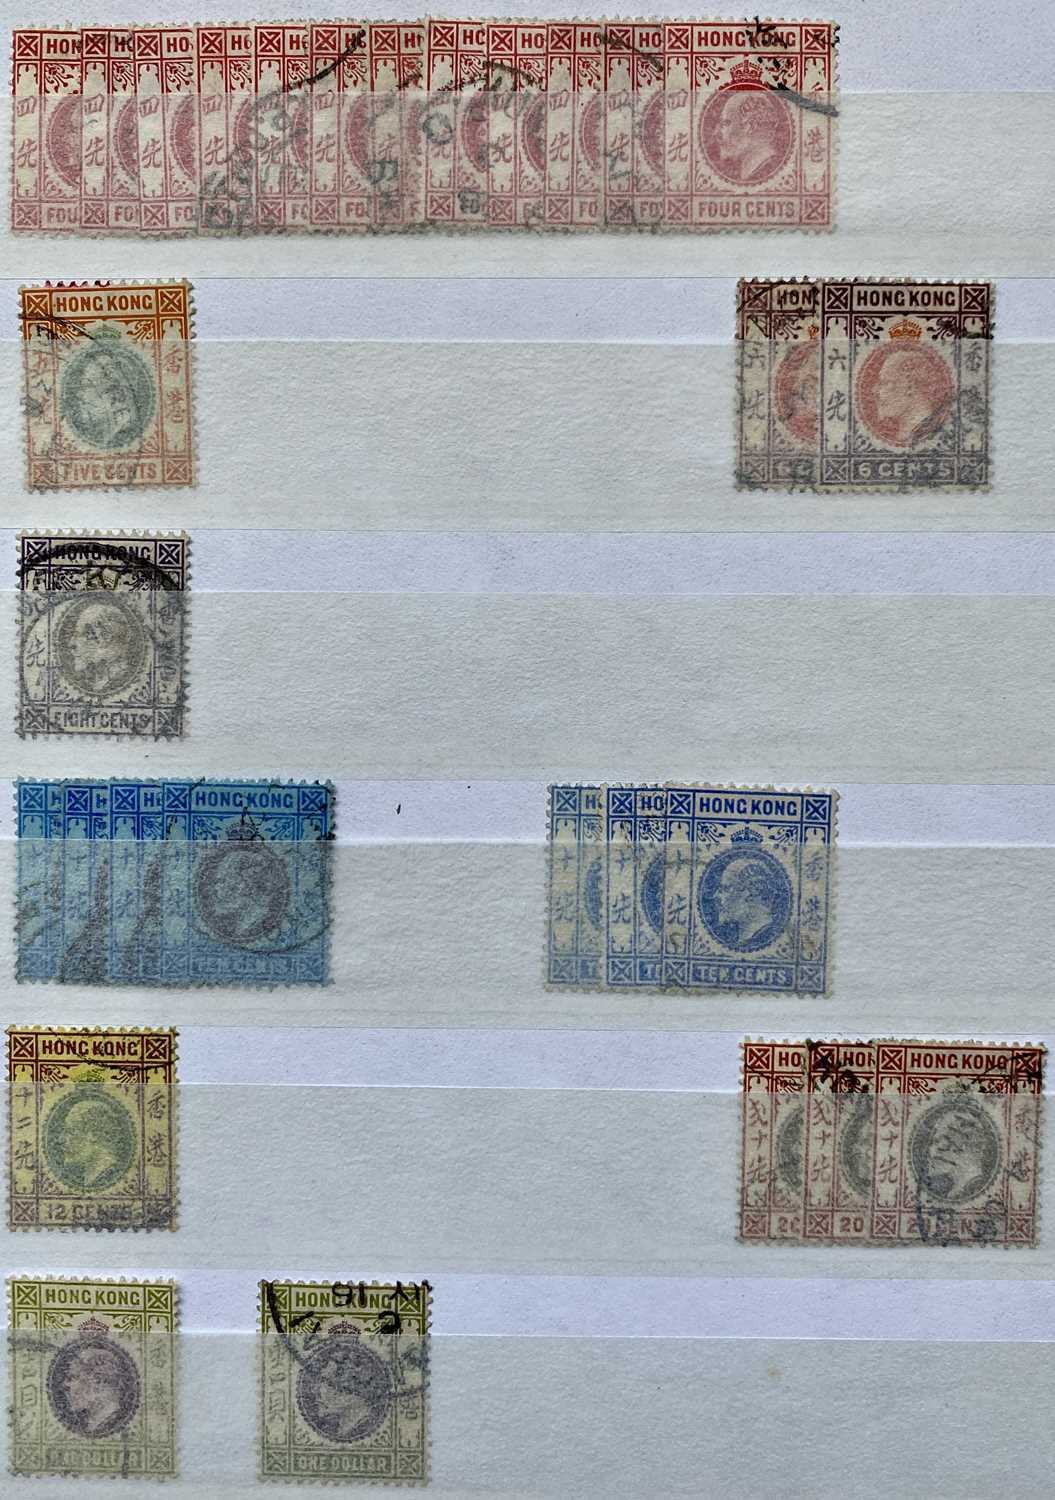 VERY GOOD HONG KONG UNMOUNTED MINT & FINE USED HIGH CAT VALUE, OVERPRINTS ETC - Image 16 of 19